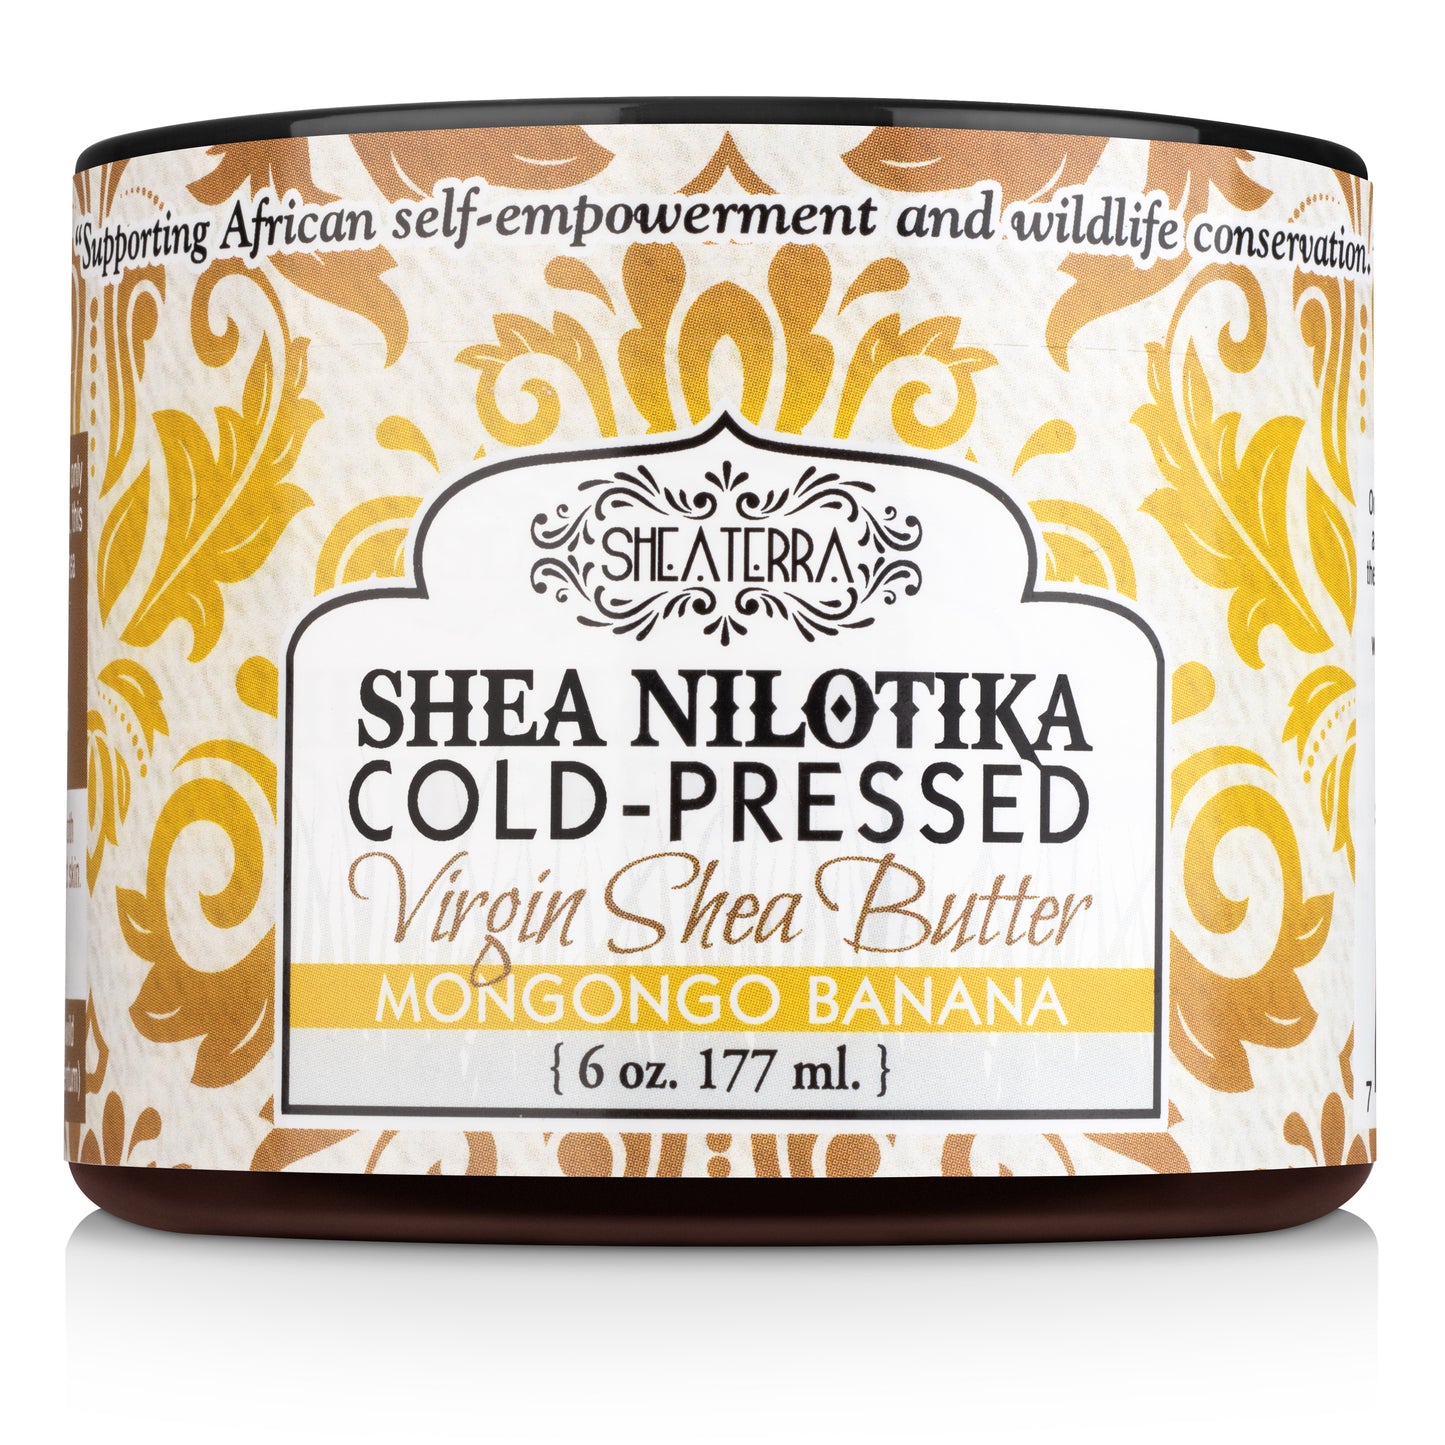 100% Pure Cold Pressed Virgin Shea Butter